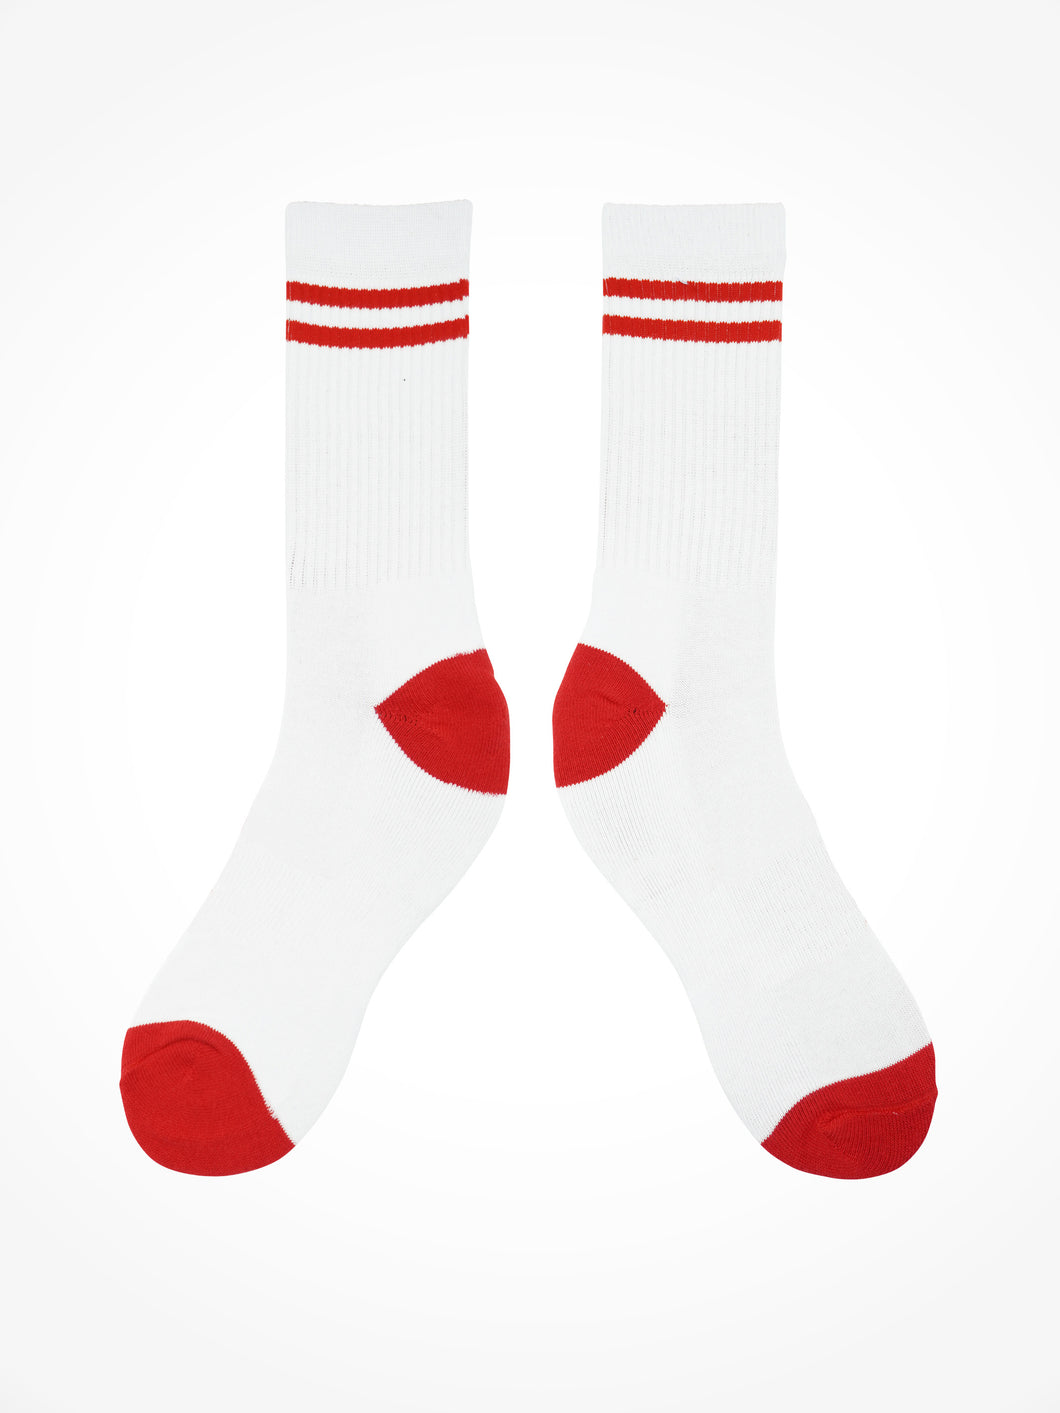 White and Red Socks